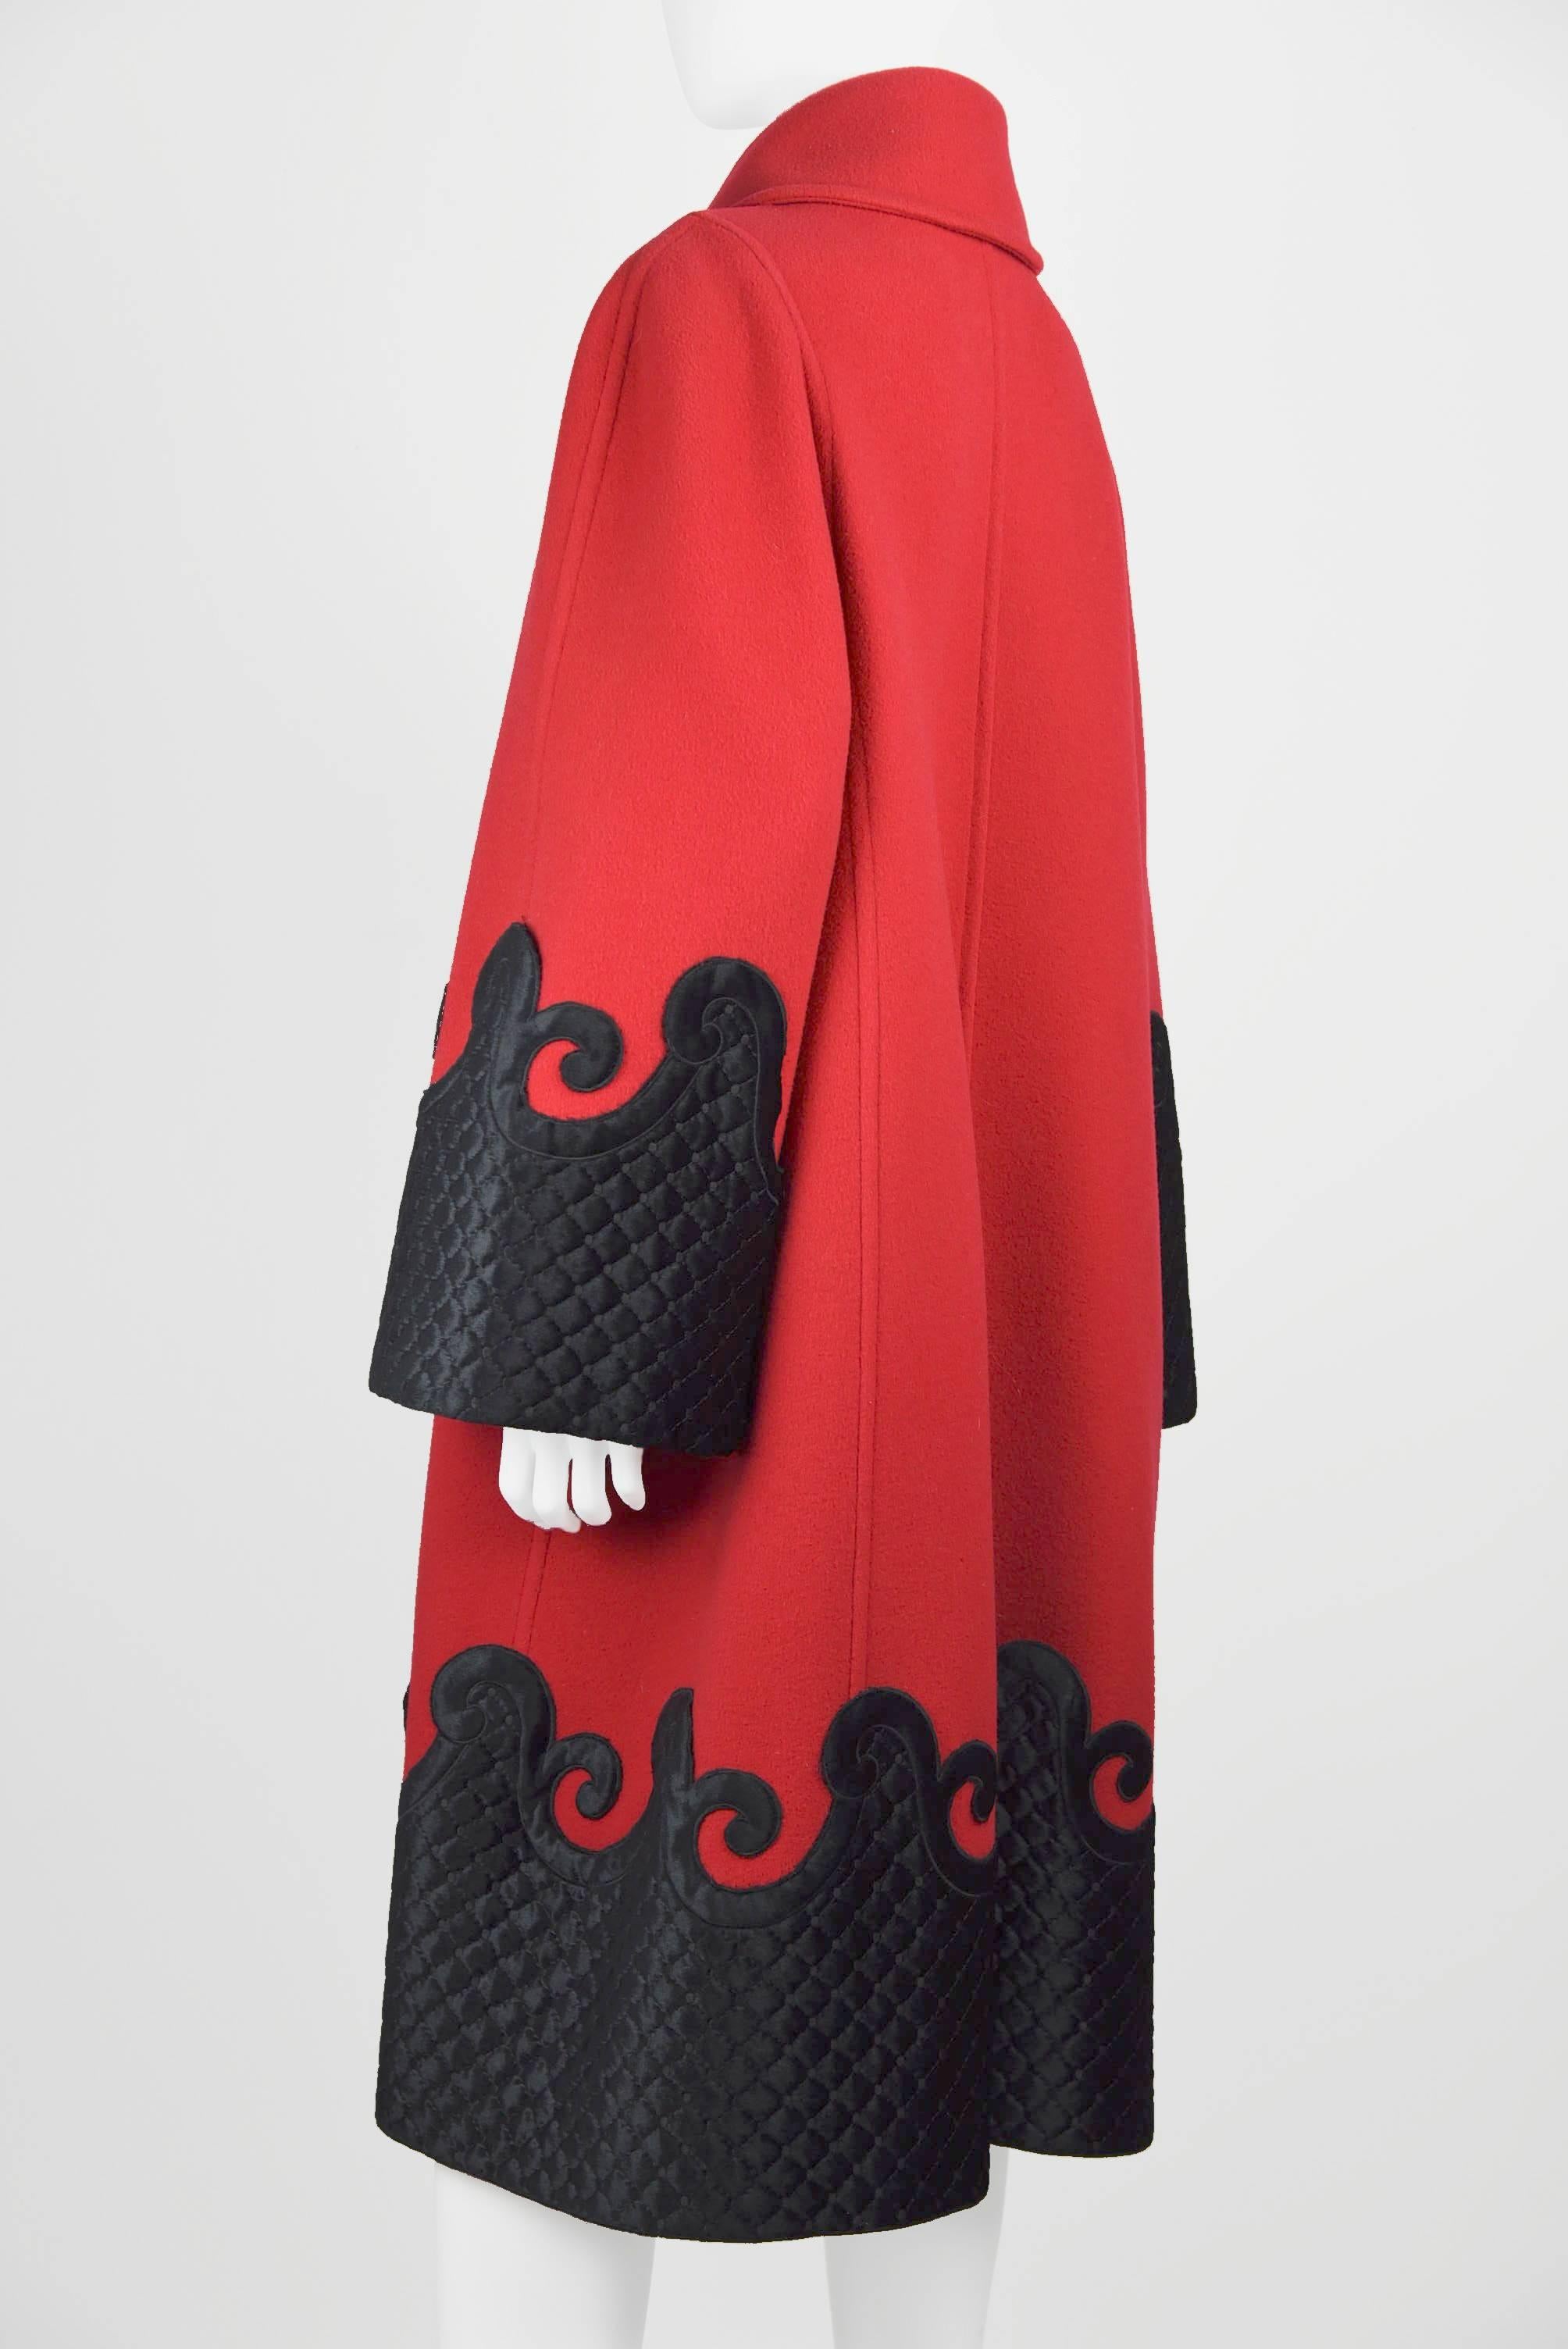 Elegant Red Evening Coat with black "quilted" applied designs to sleeves and bottom of coat.  Measurements: Height 42.75", Sleeves from shoulder to end 24 1/2", Hem circumference 66".  Fabric:  40% Rayon, 30% Polimid, 30%